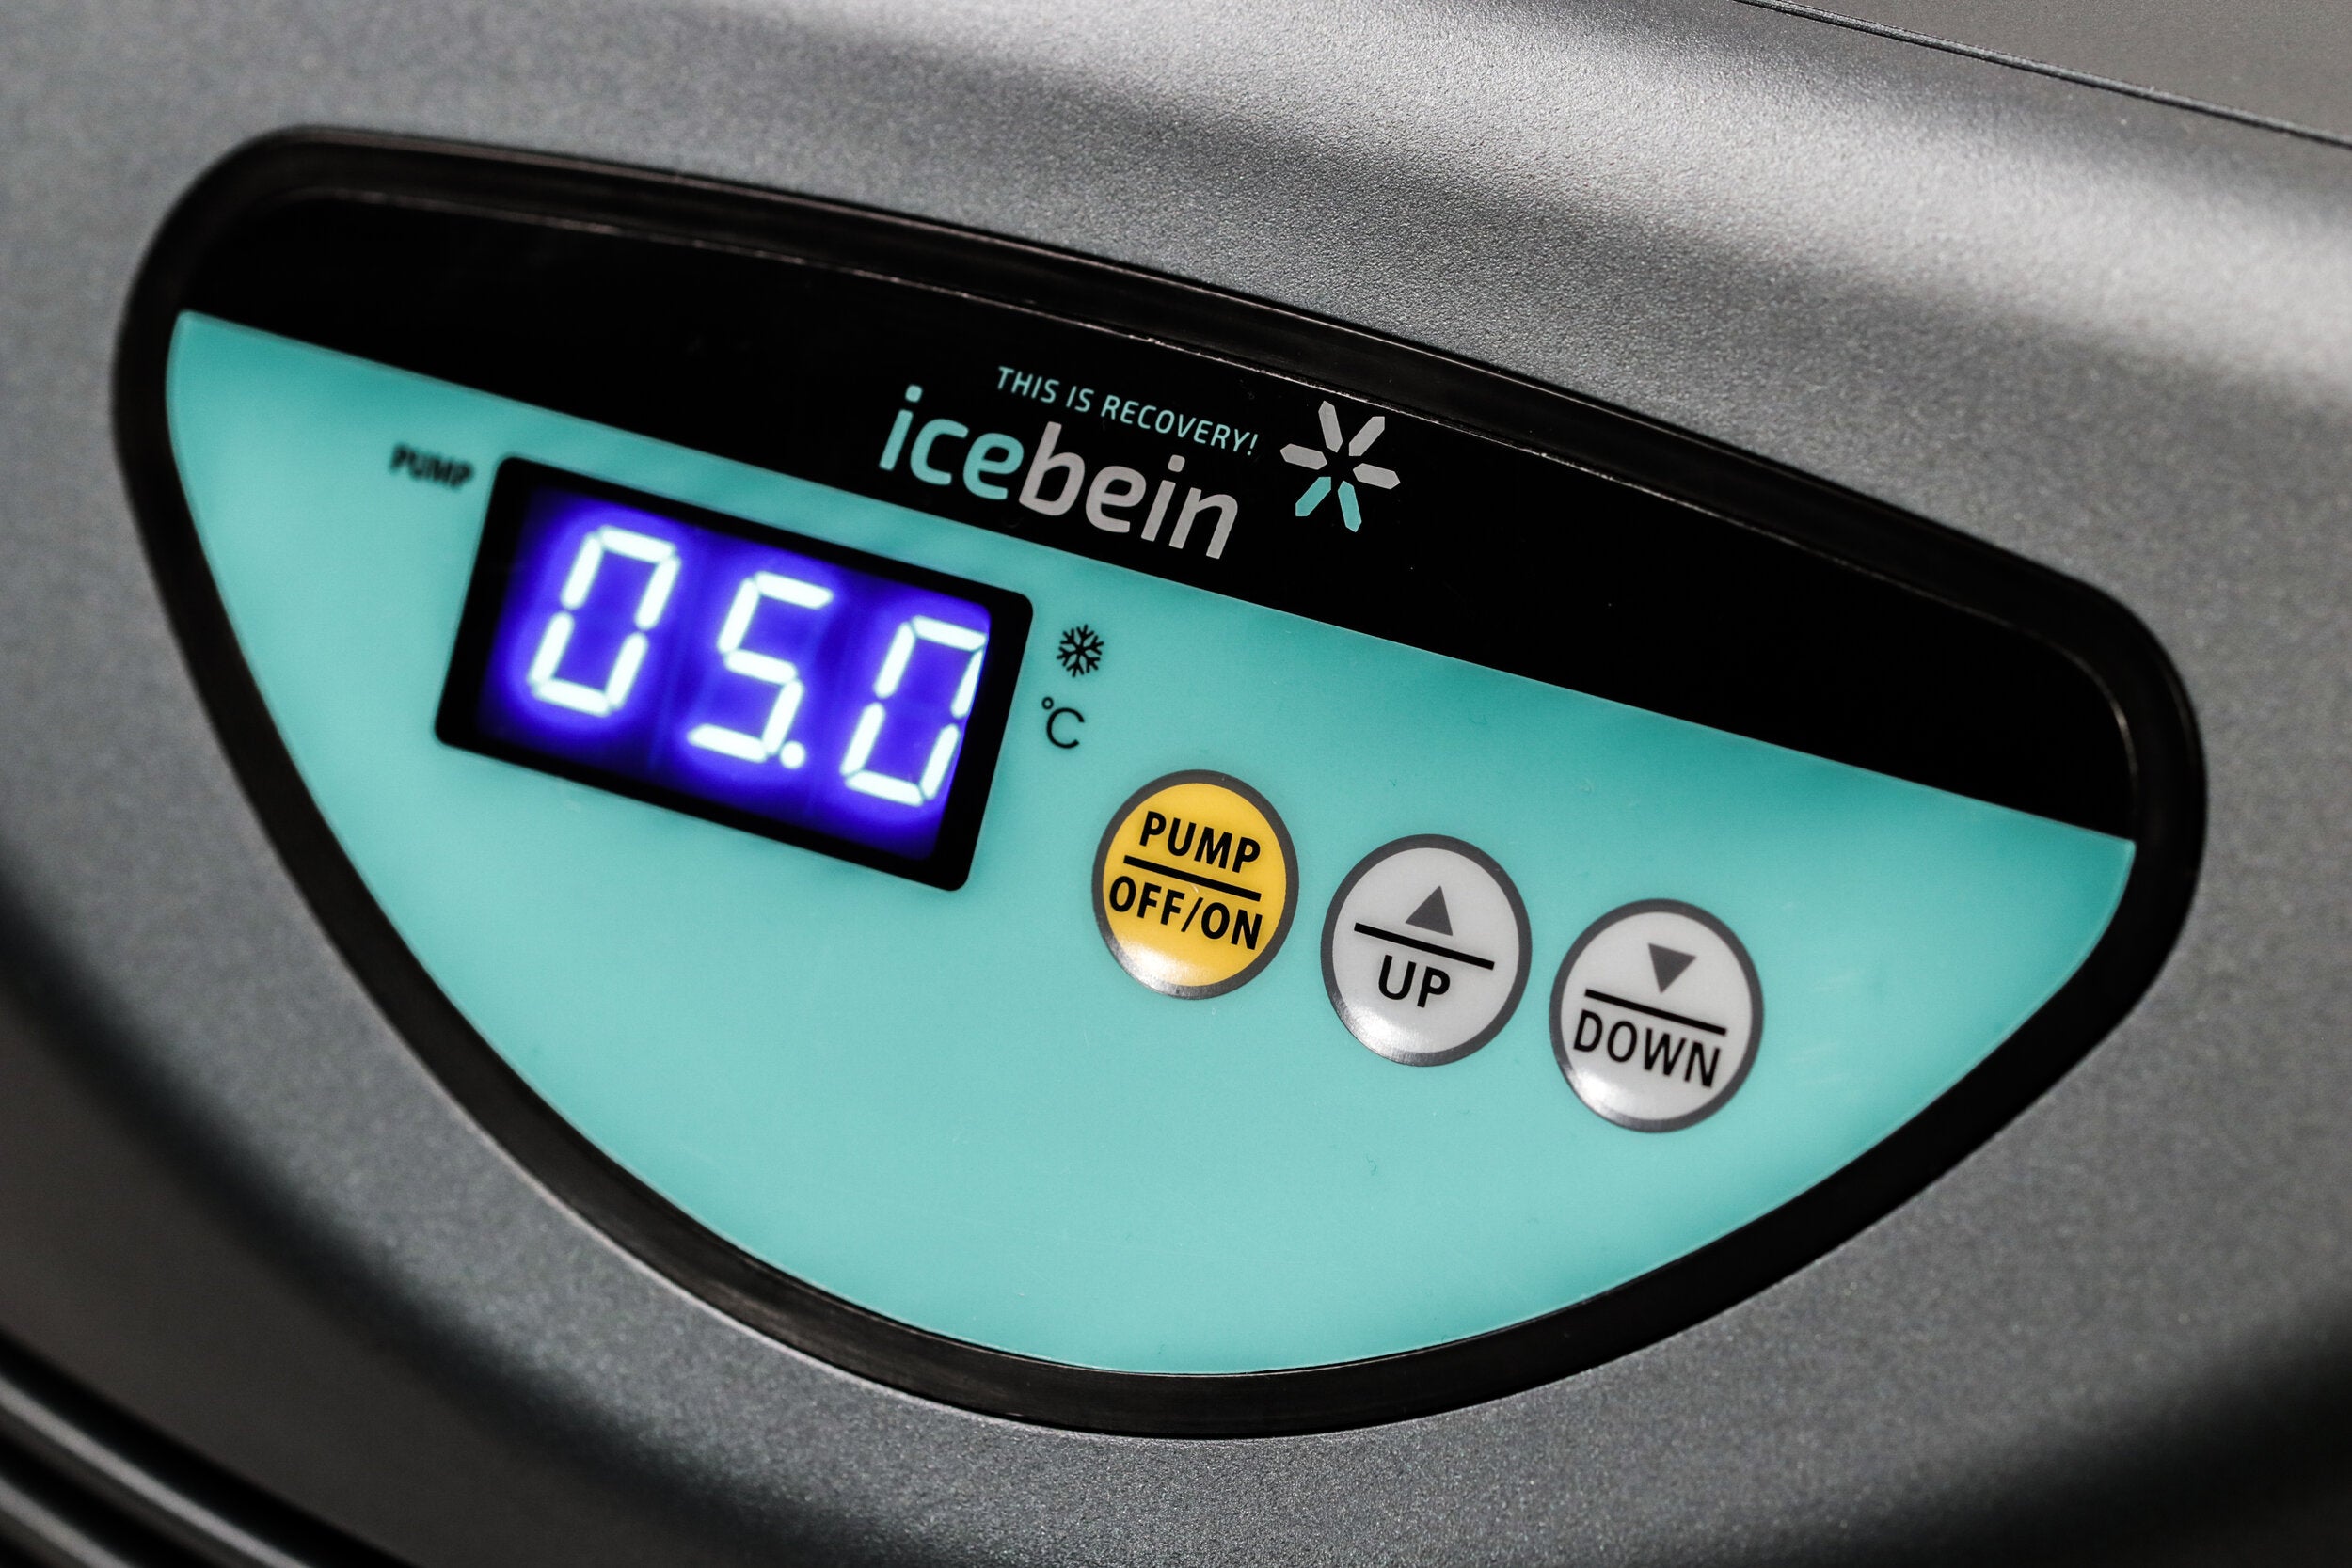 The Icebein Recovery System